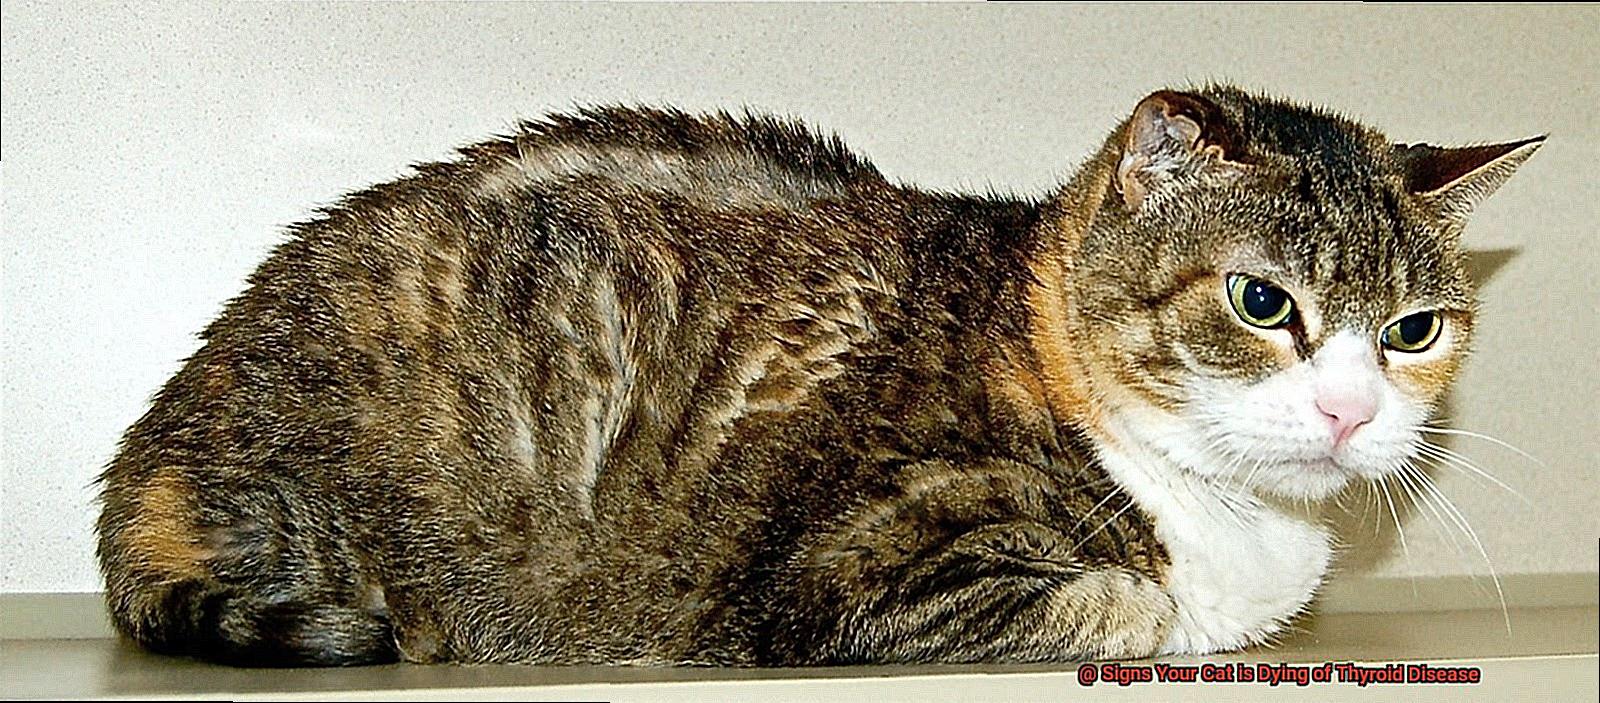 Signs Your Cat is Dying of Thyroid Disease-4